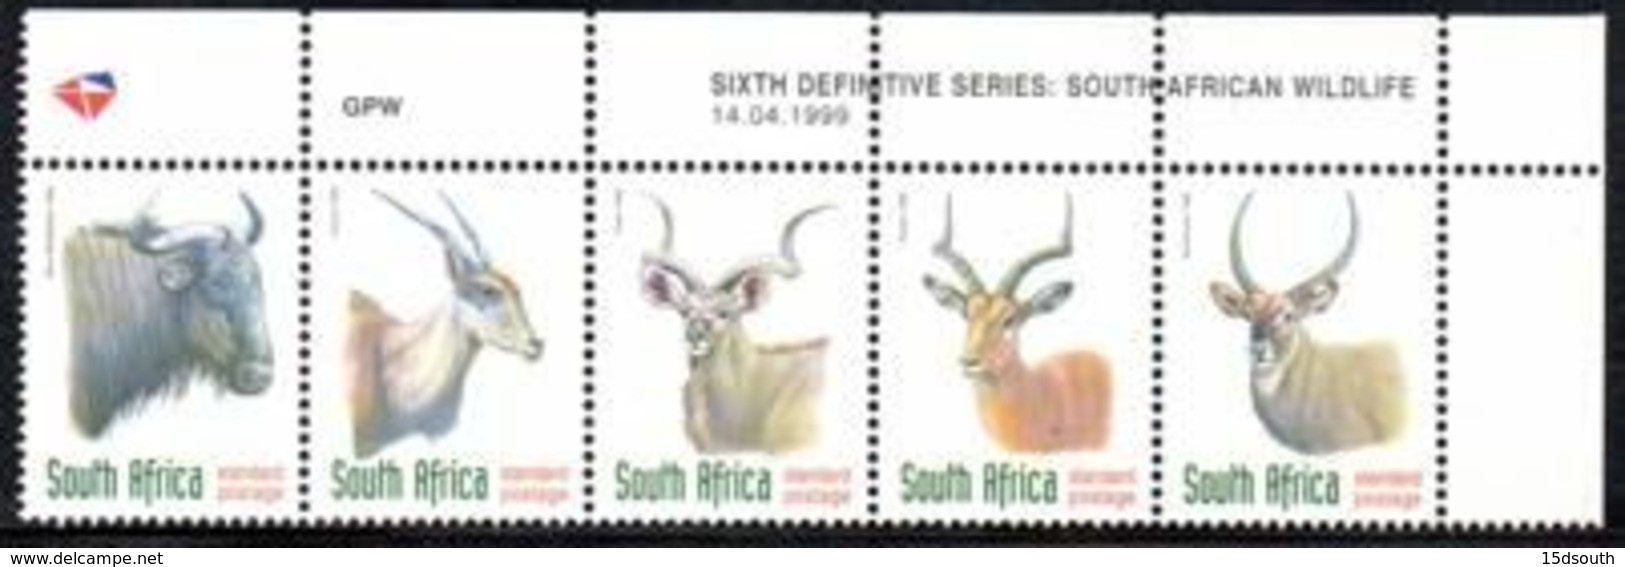 South Africa - 1999 Redrawn 6th Definitive SPR Antelopes Control Block (1999.04.14) (**) - Blocs-feuillets